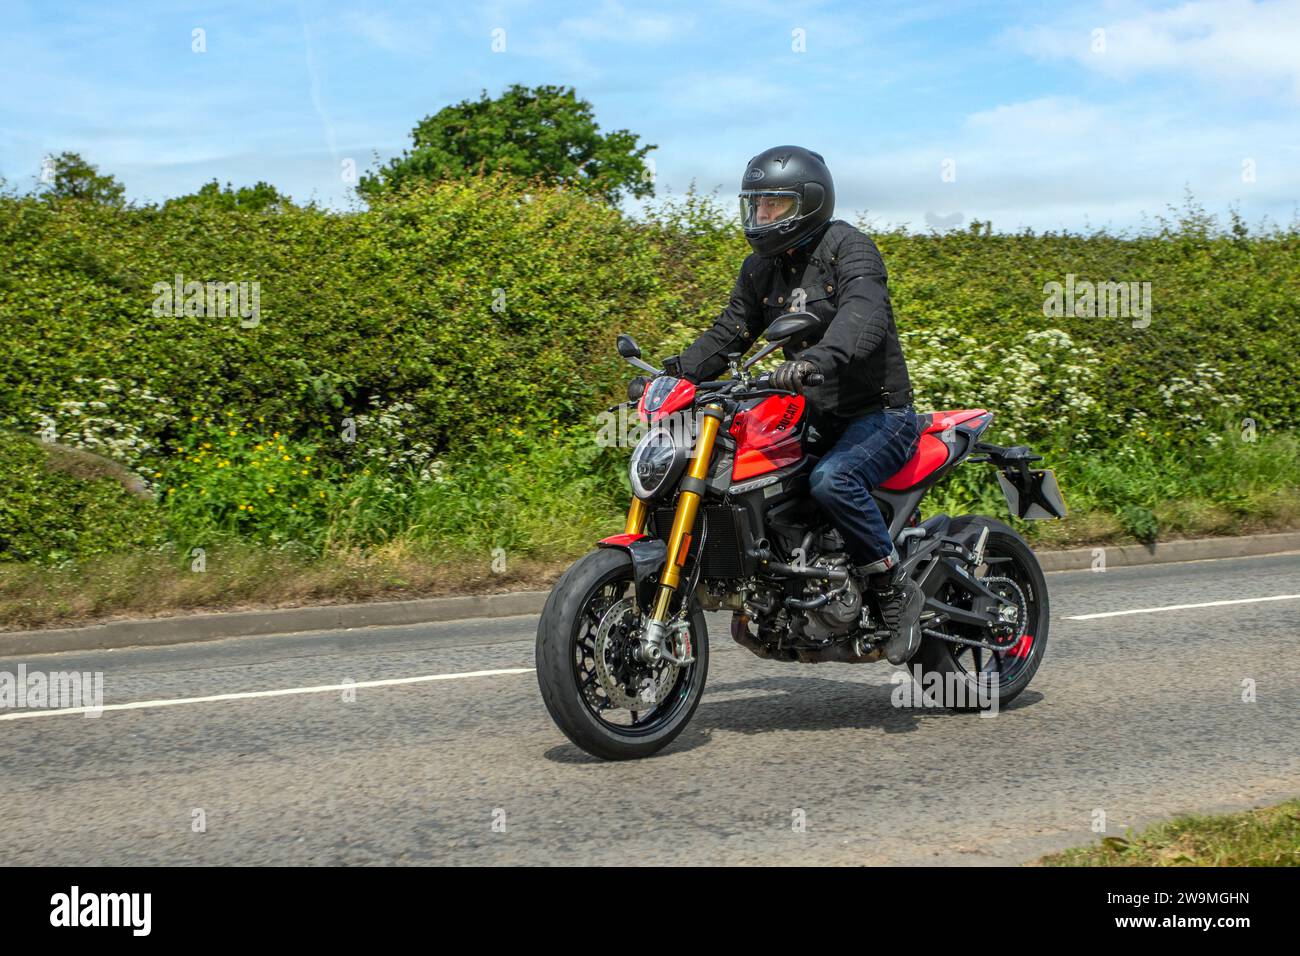 Ducati  retro styled sports motorcycles rider on the M61 motorway UK; travelling on the M6 motorway in Greater Manchester, UK Stock Photo